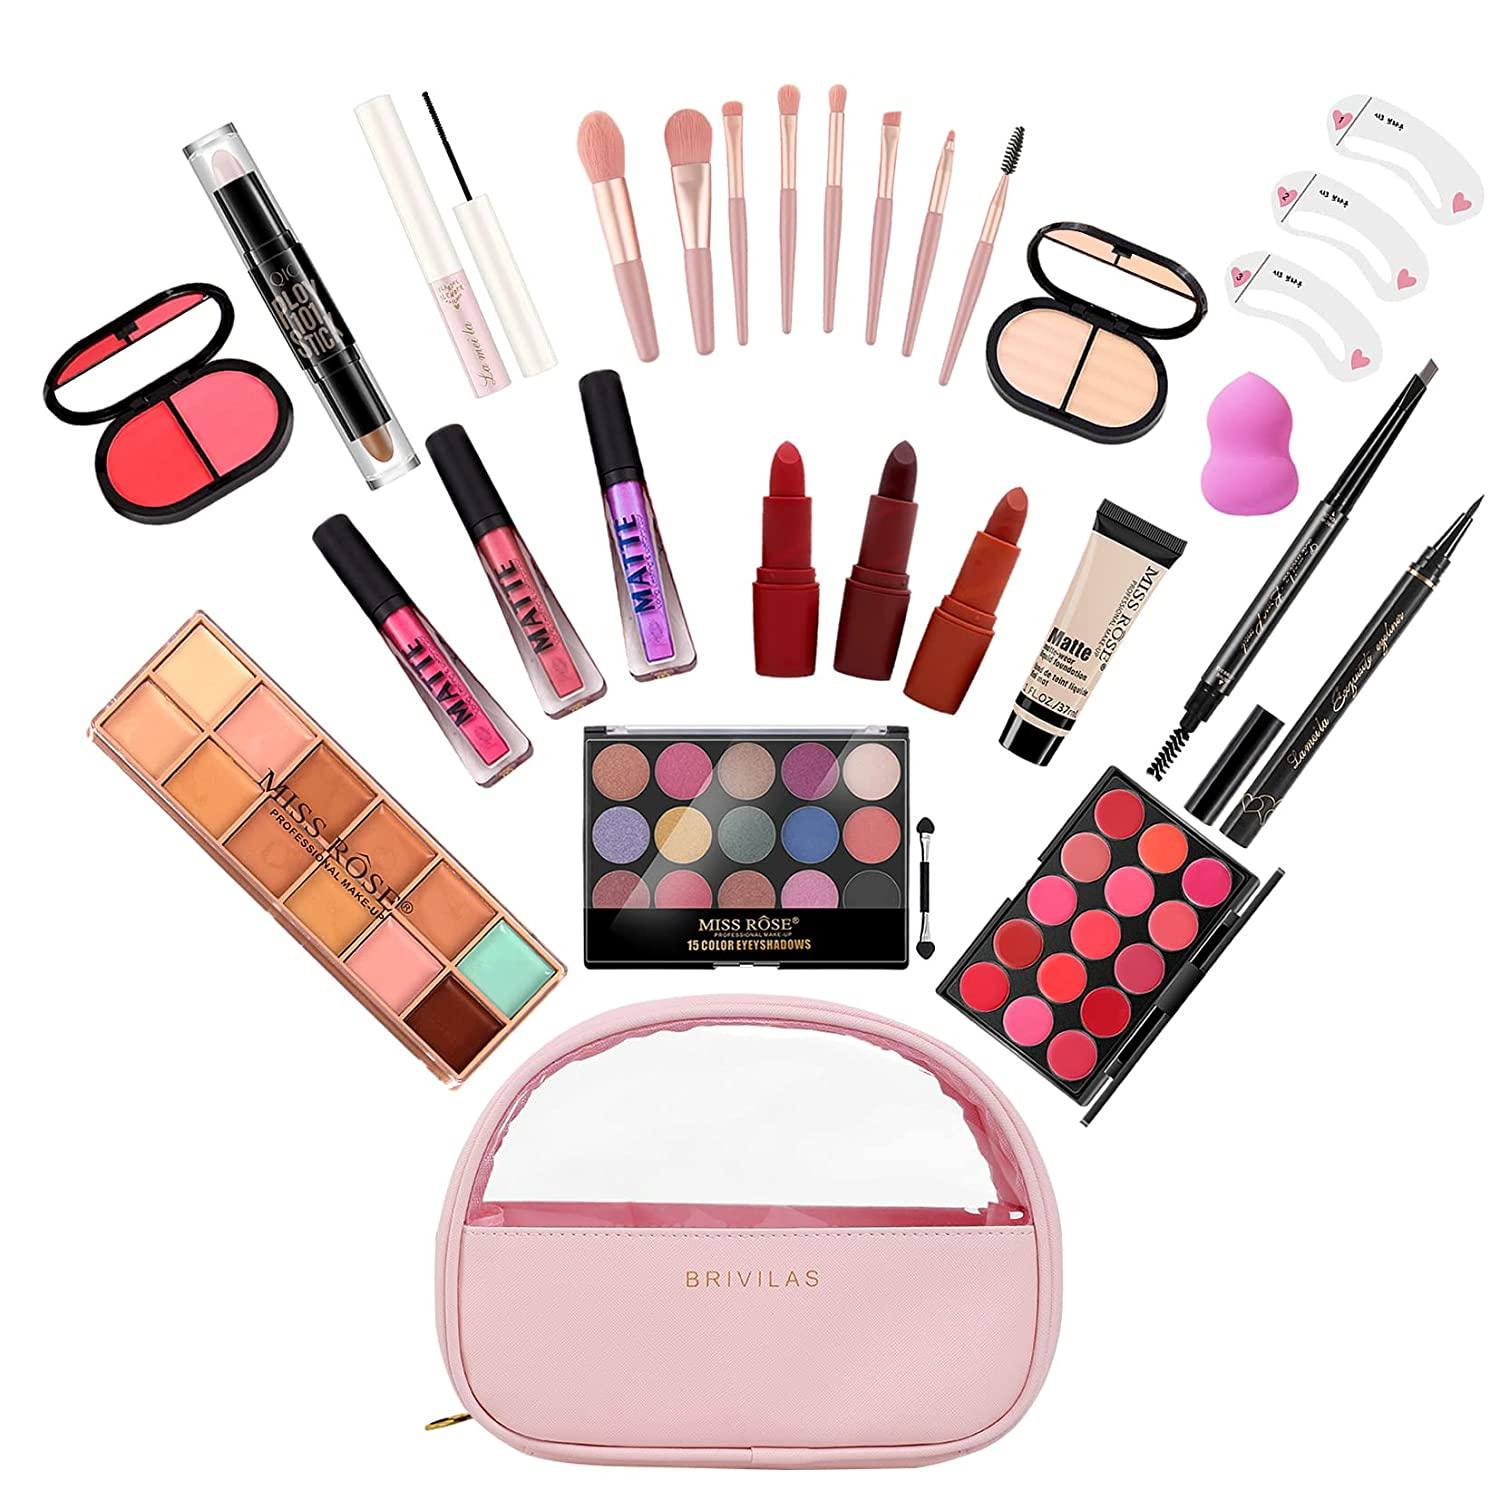 MISS ROSE M All In One Makeup Kit, Makeup Kit for Women Full  Kit,Multipurpose Women's Makeup Sets,Beginners and Professionals Alike,Easy  to Carry(Pink)